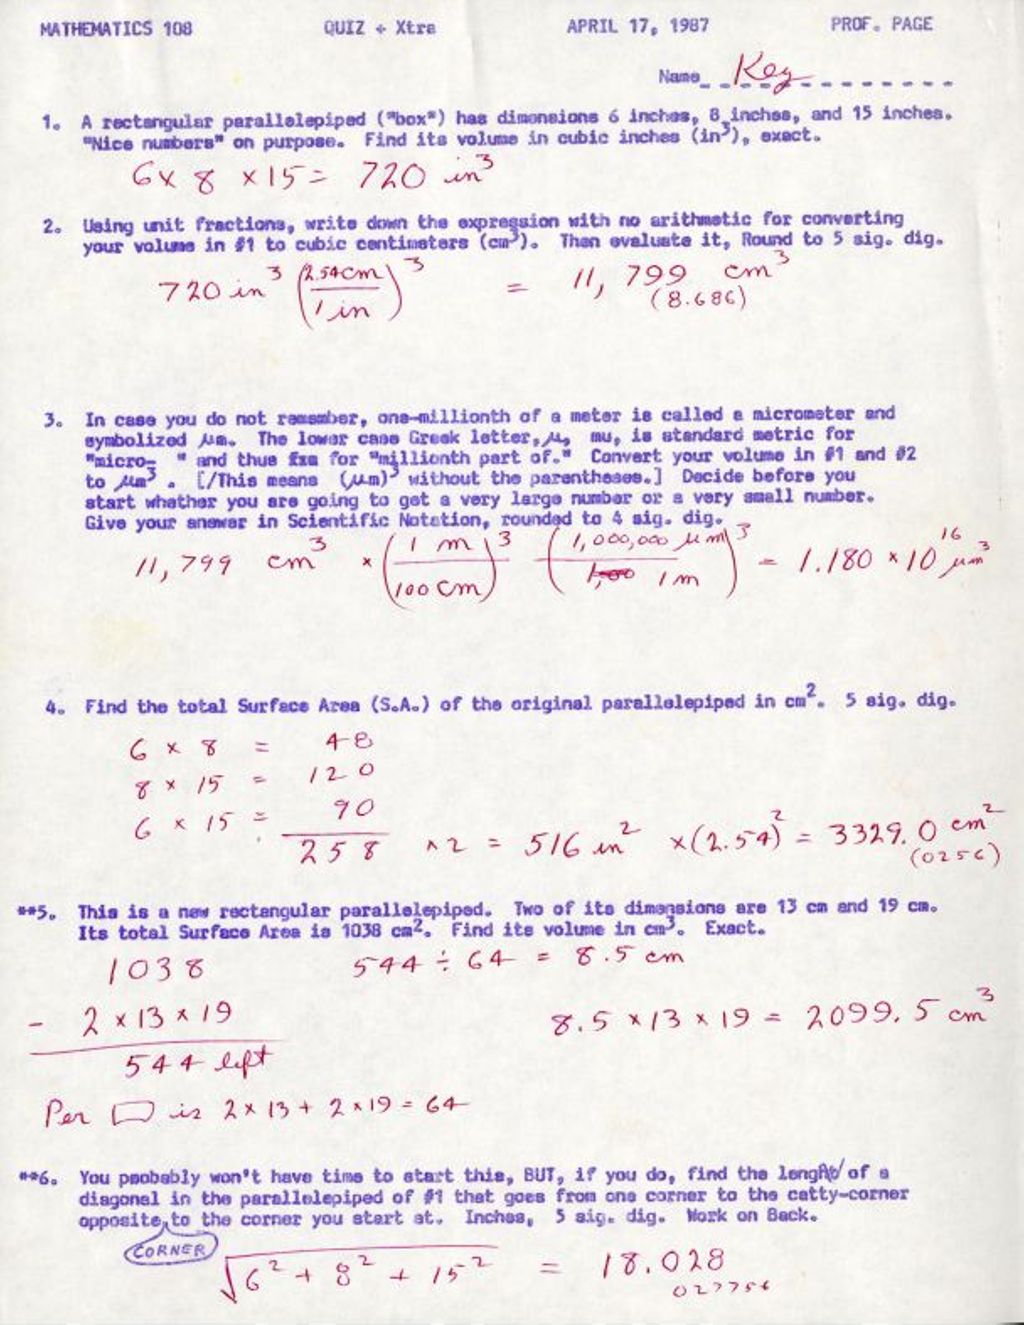 Math 108 Quiz + Xtra (1987) “A rectangular Parallelelipiped . .” w/ Answer Key notes from DP